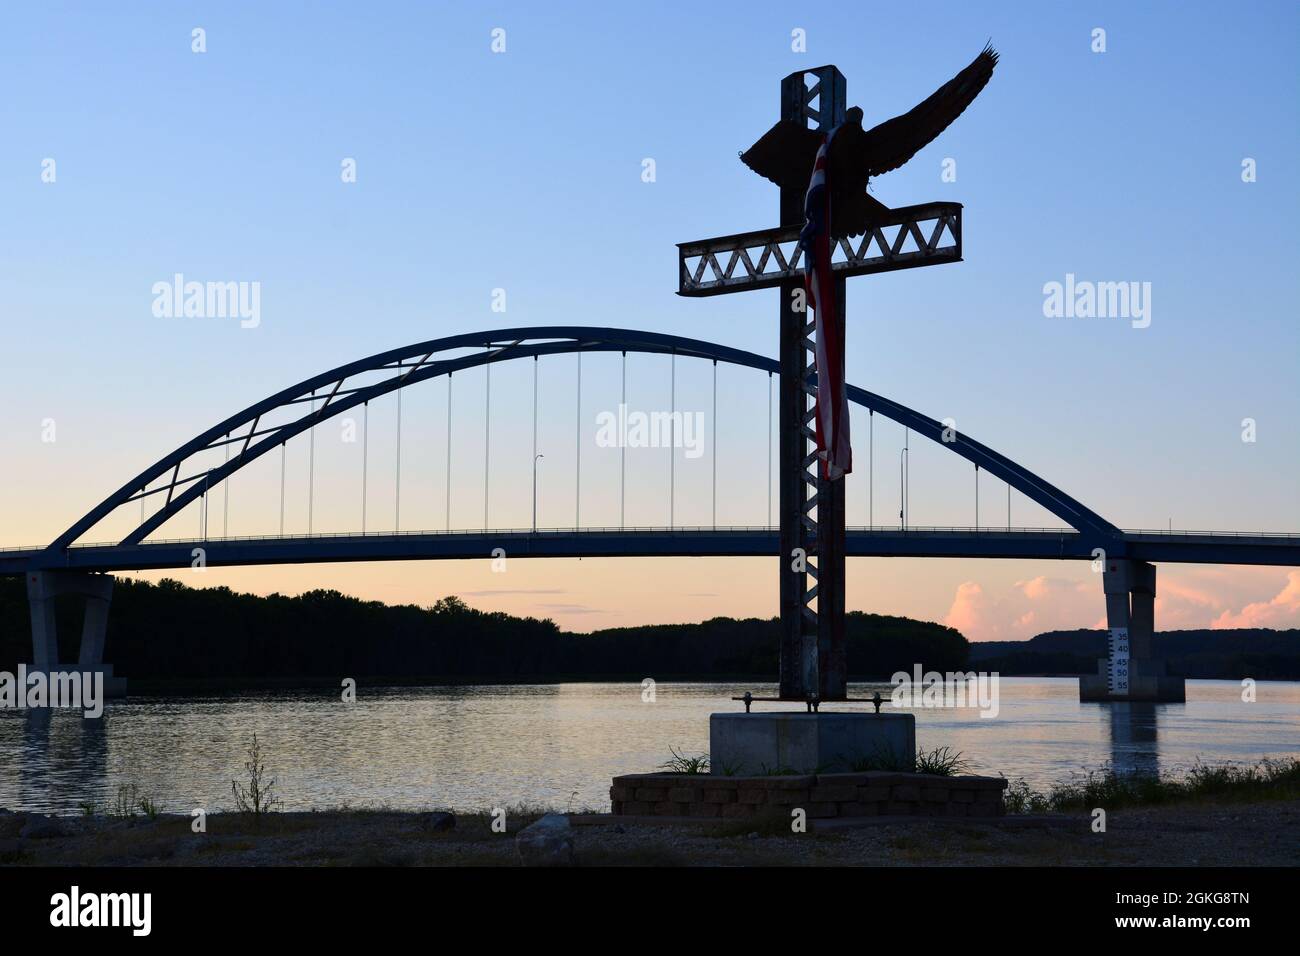 The 'River Eagle' sculpture at sunset on the Mississippi River in Savanna, IL, with the US 52 bridge in the background. Stock Photo